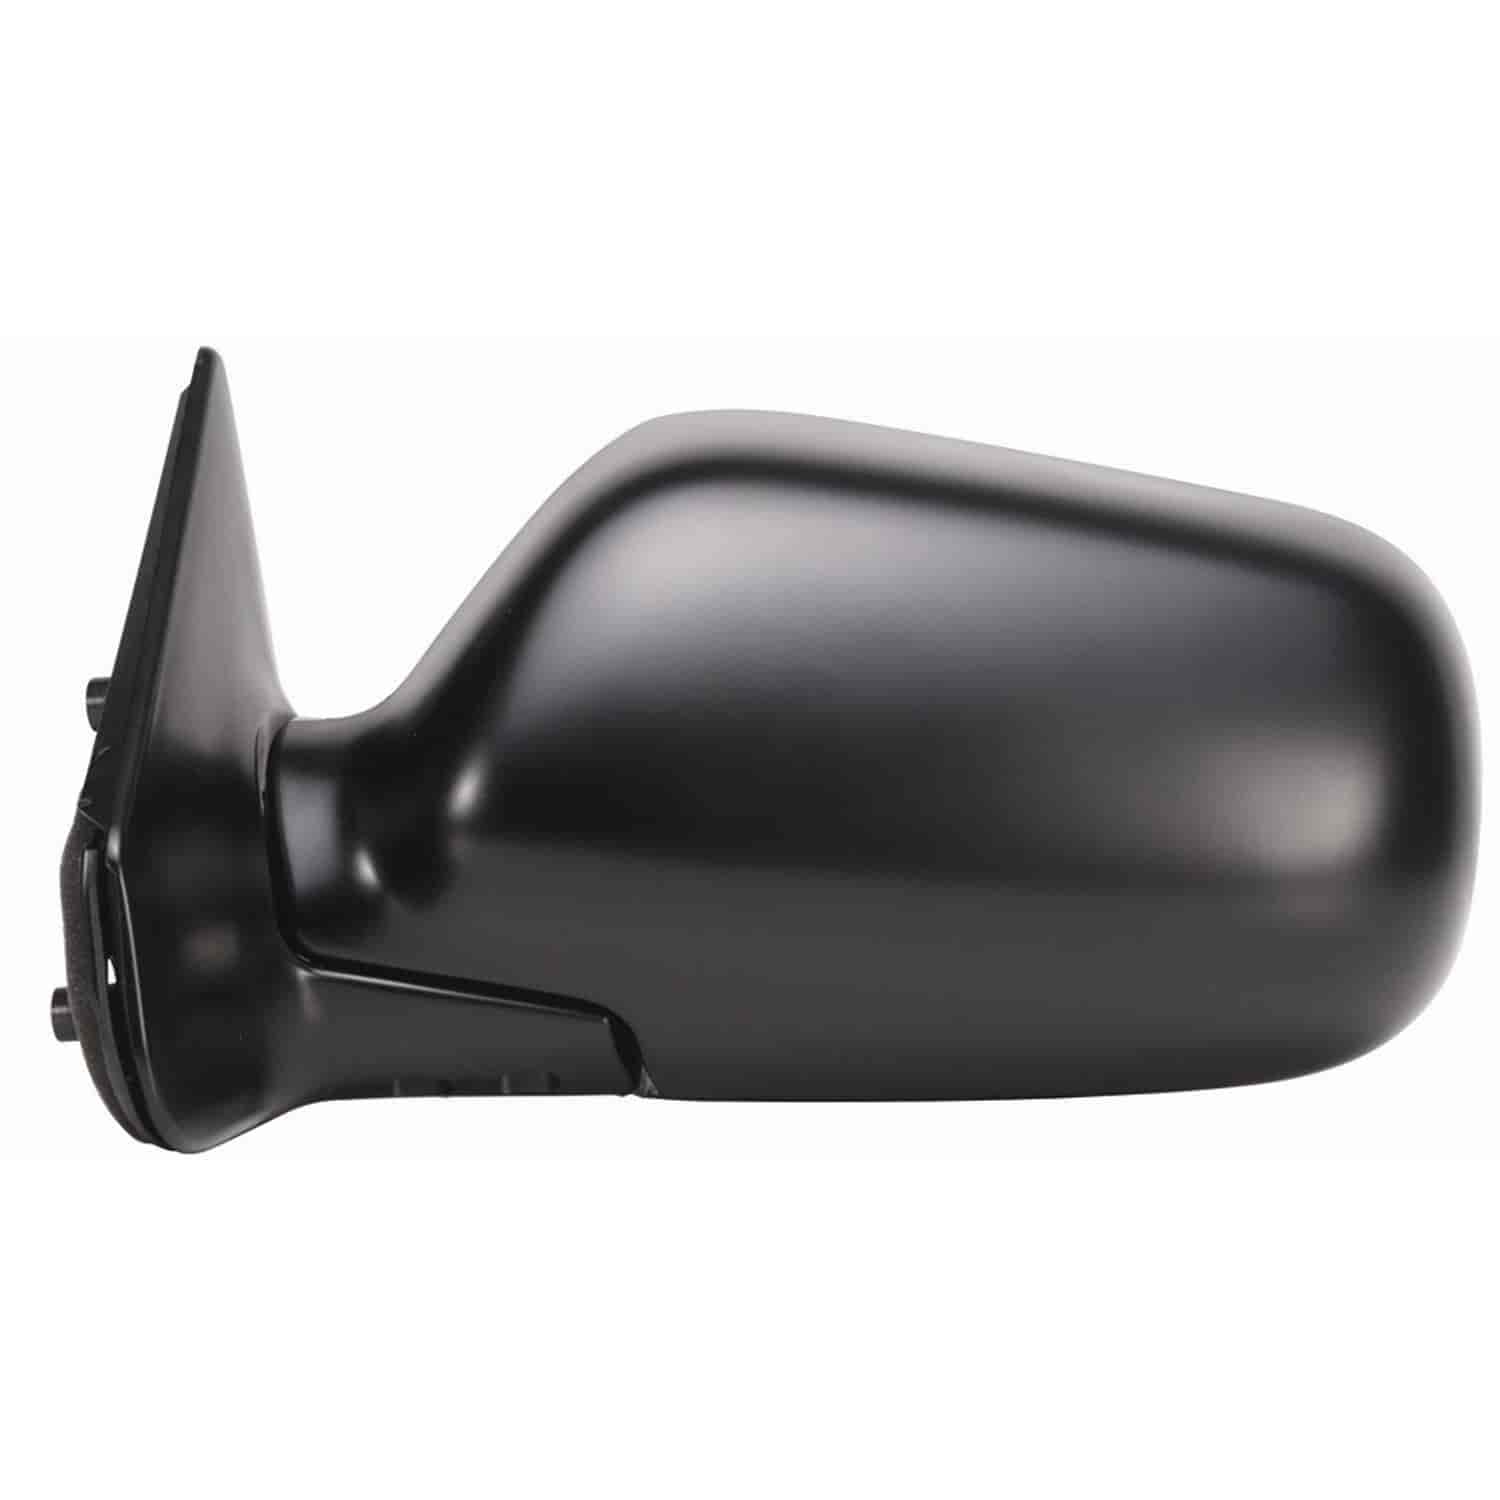 OEM Style Replacement mirror for 95-99 SUBARU Legacy driver side mirror tested to fit and function l